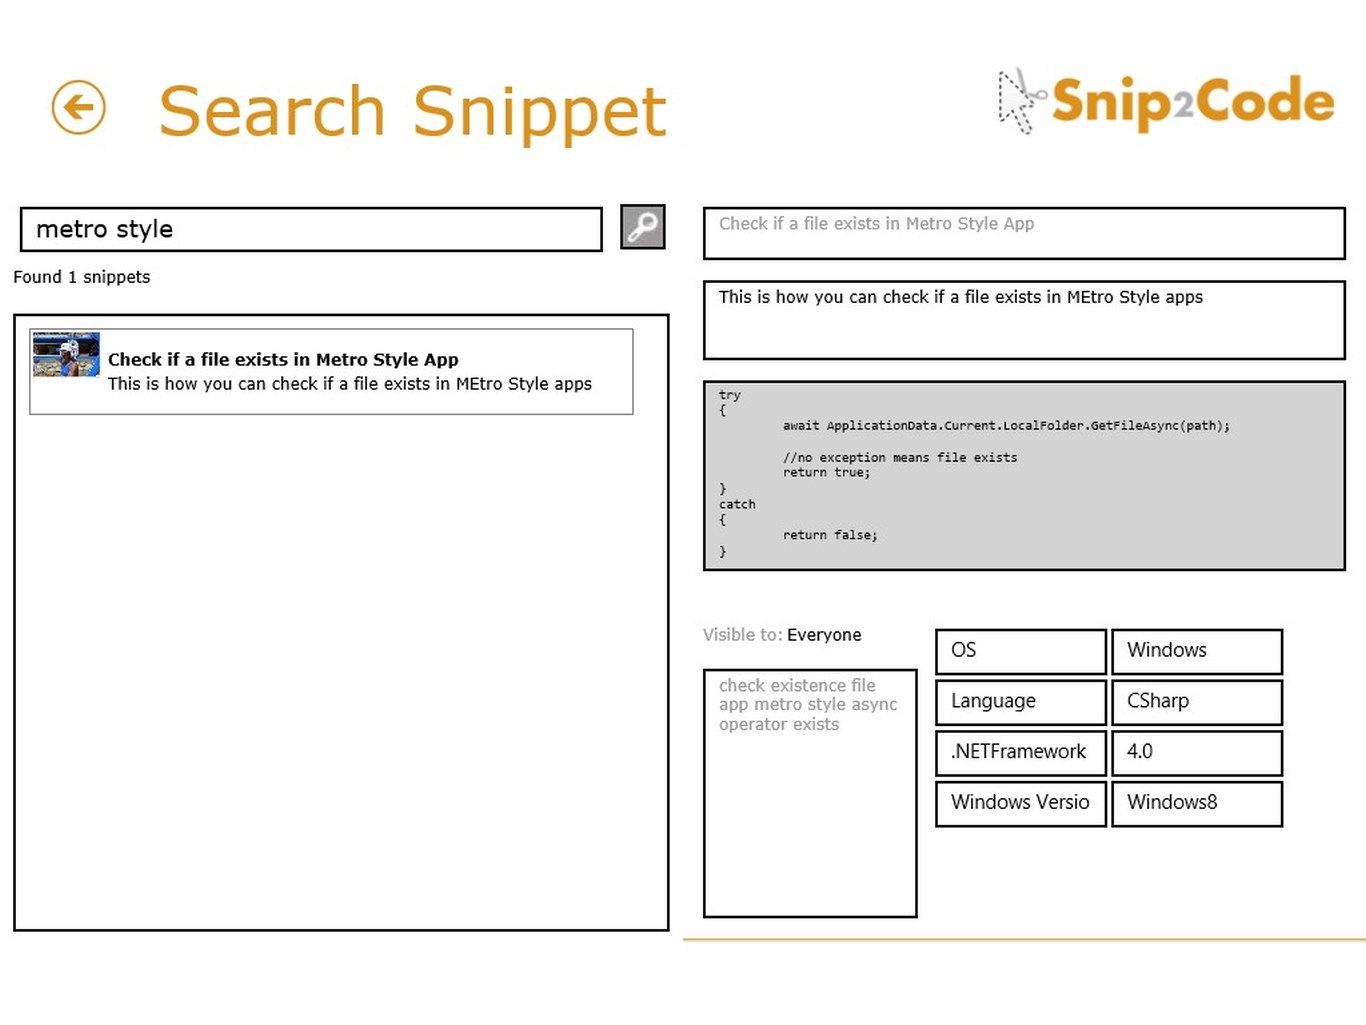 Effective and powerful search engine, retrieving snippets for private basket, team-mates knowledge, and public community